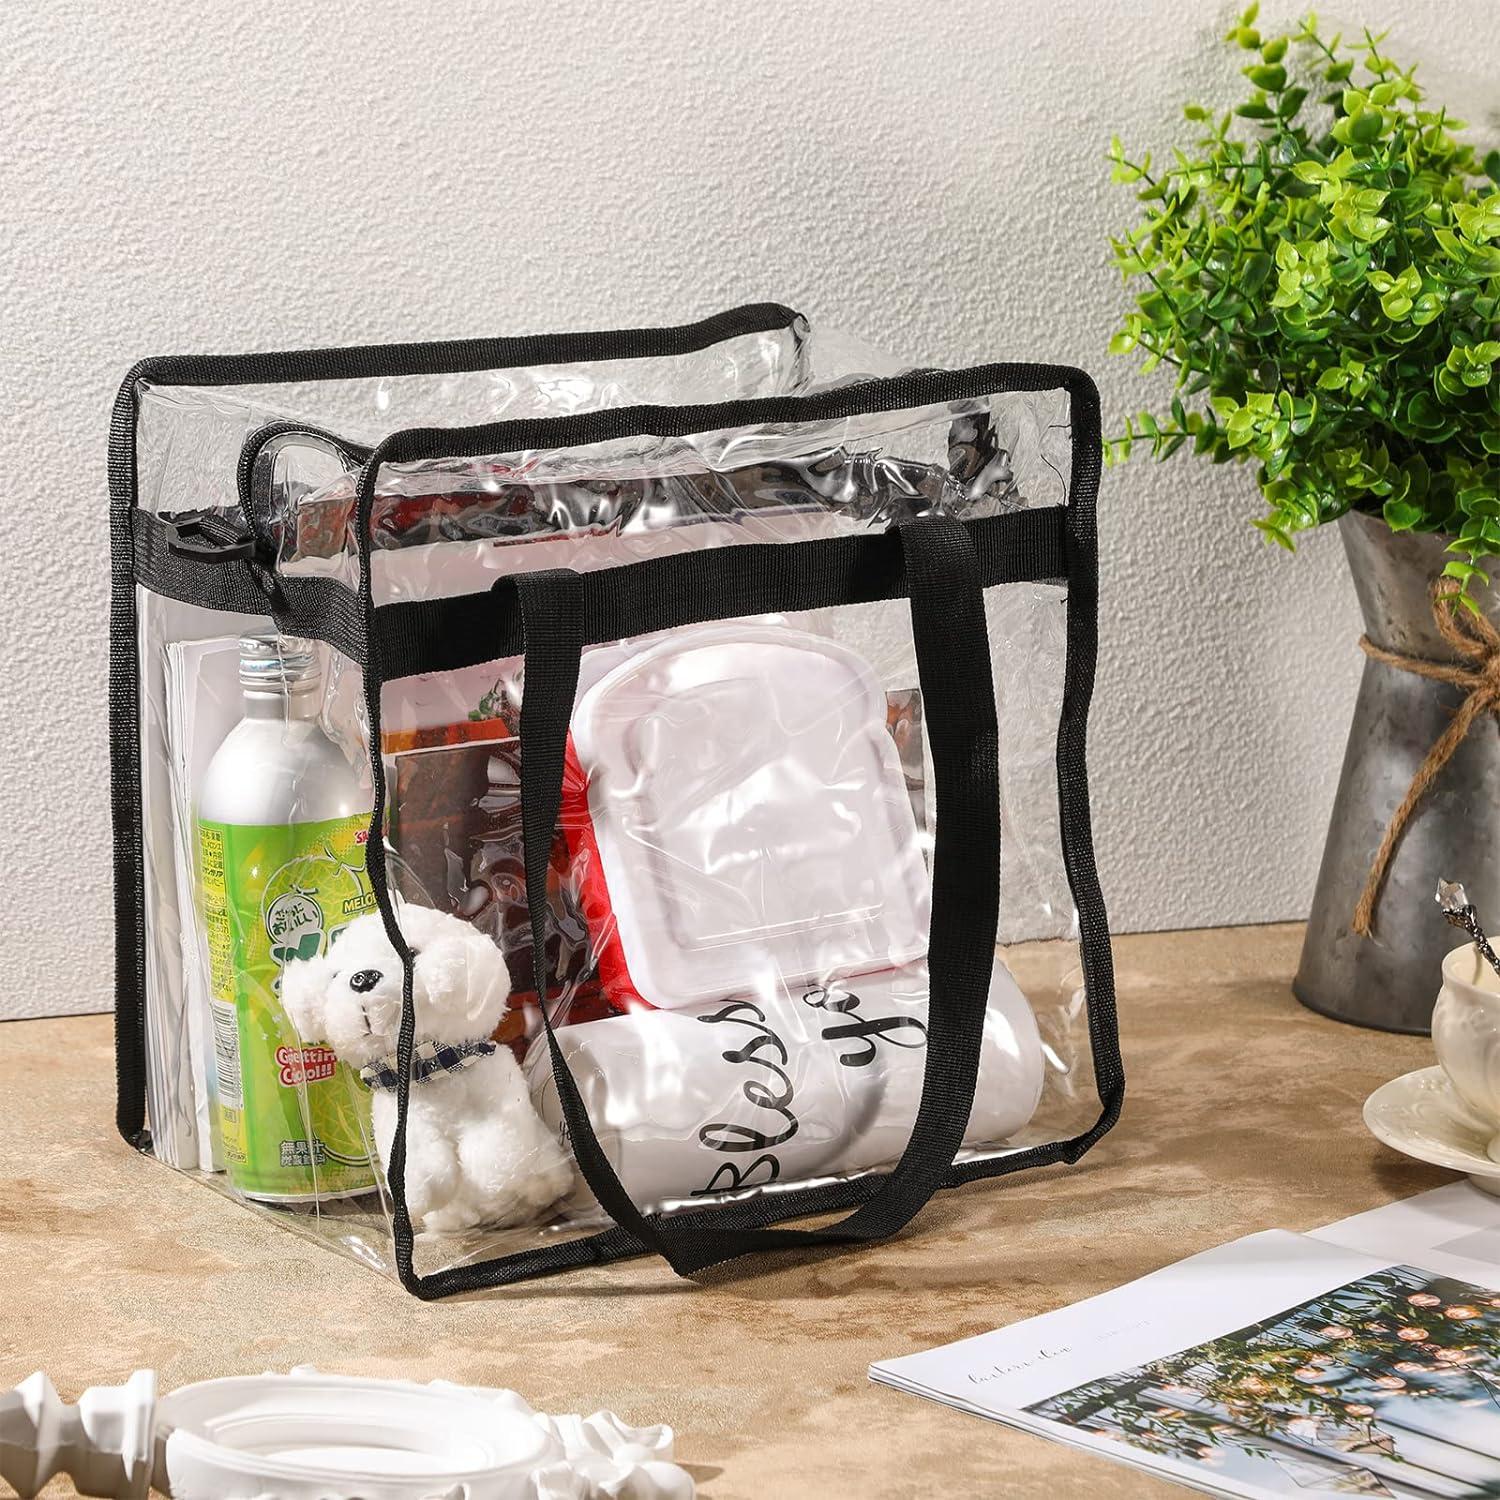 6 Pcs Clear Bag Stadium Approved Clear Tote Bag with Zipper